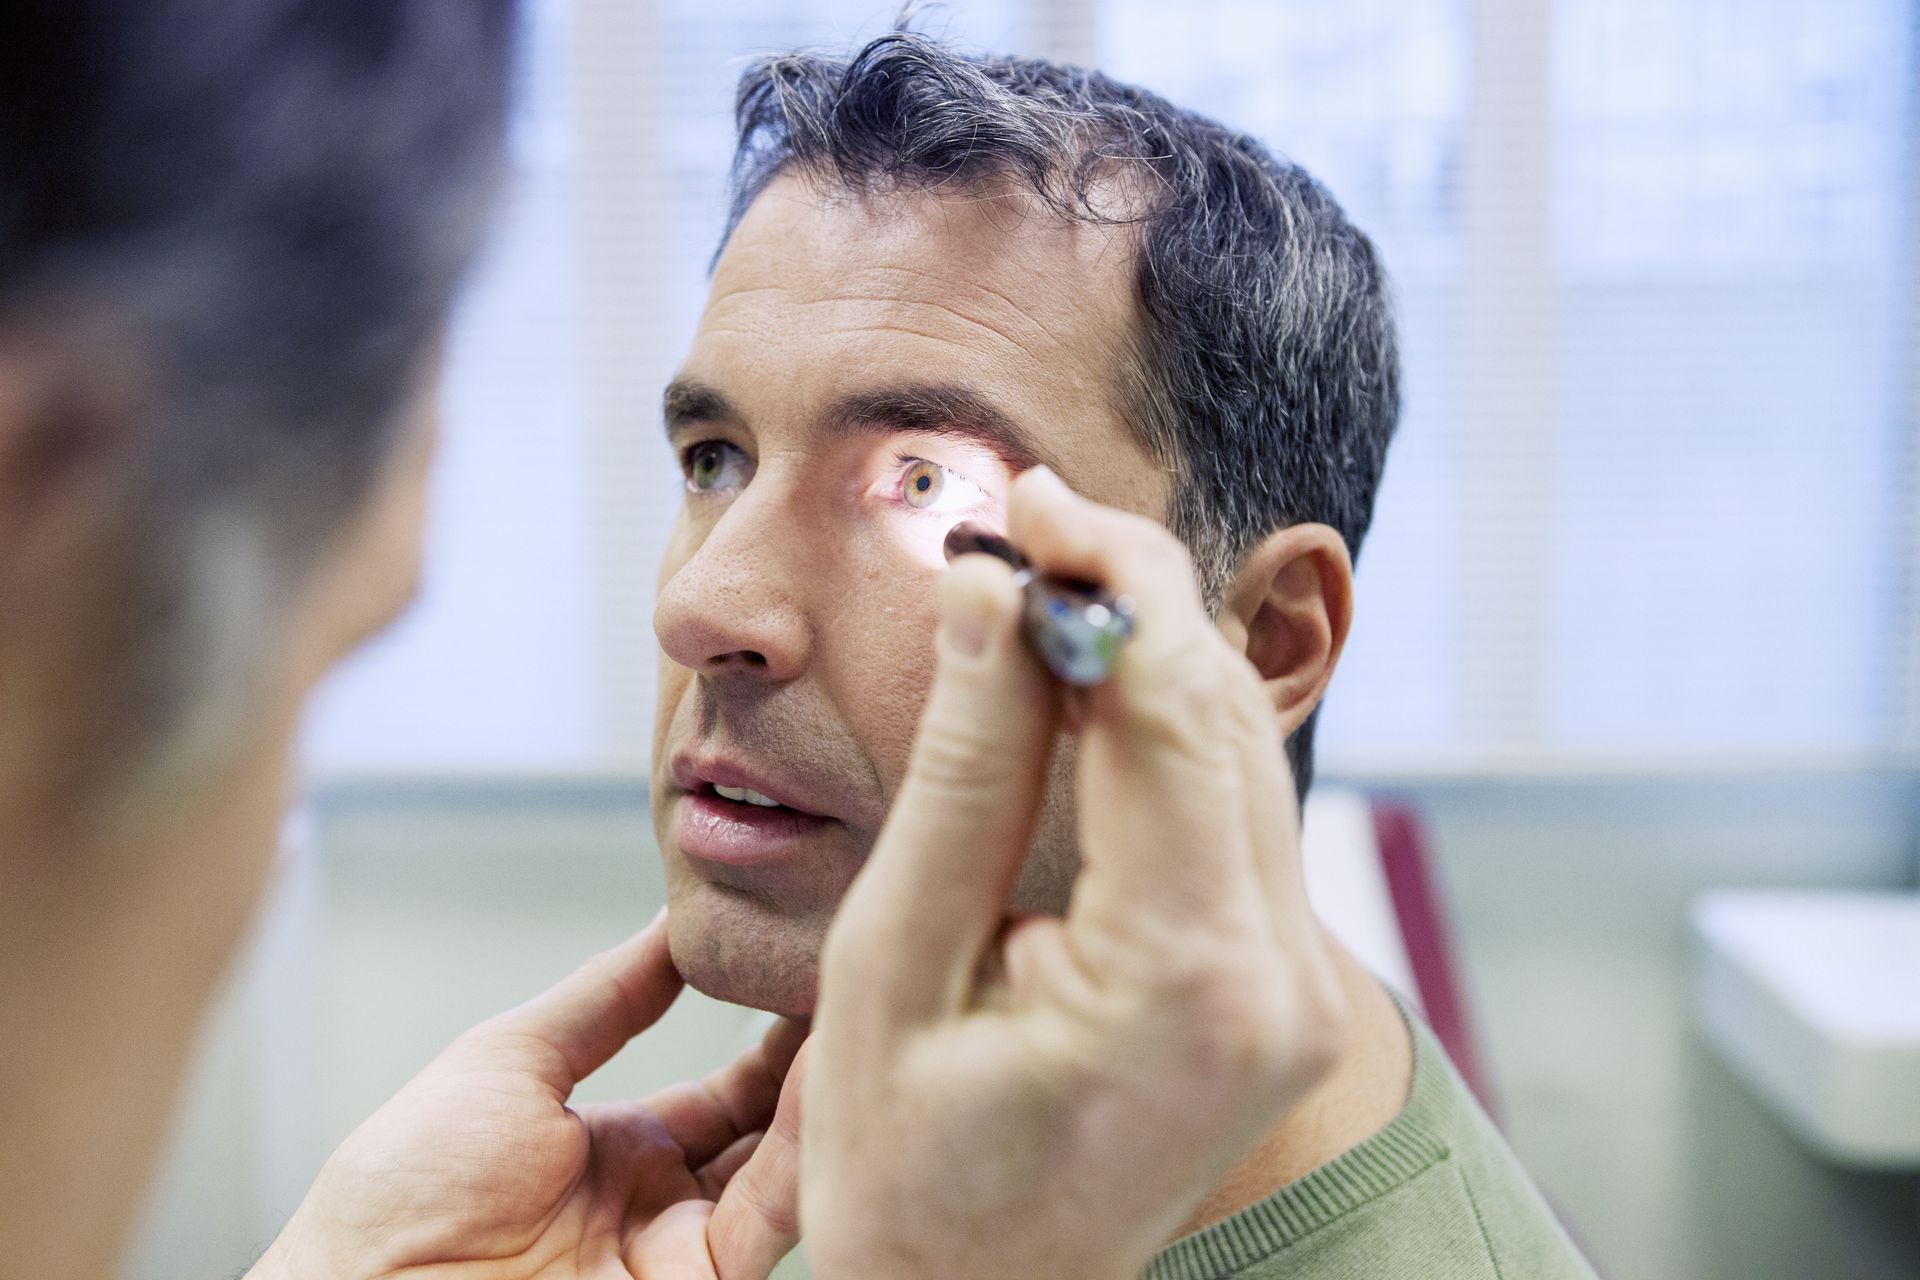 A man is getting his eyes examined by a doctor.